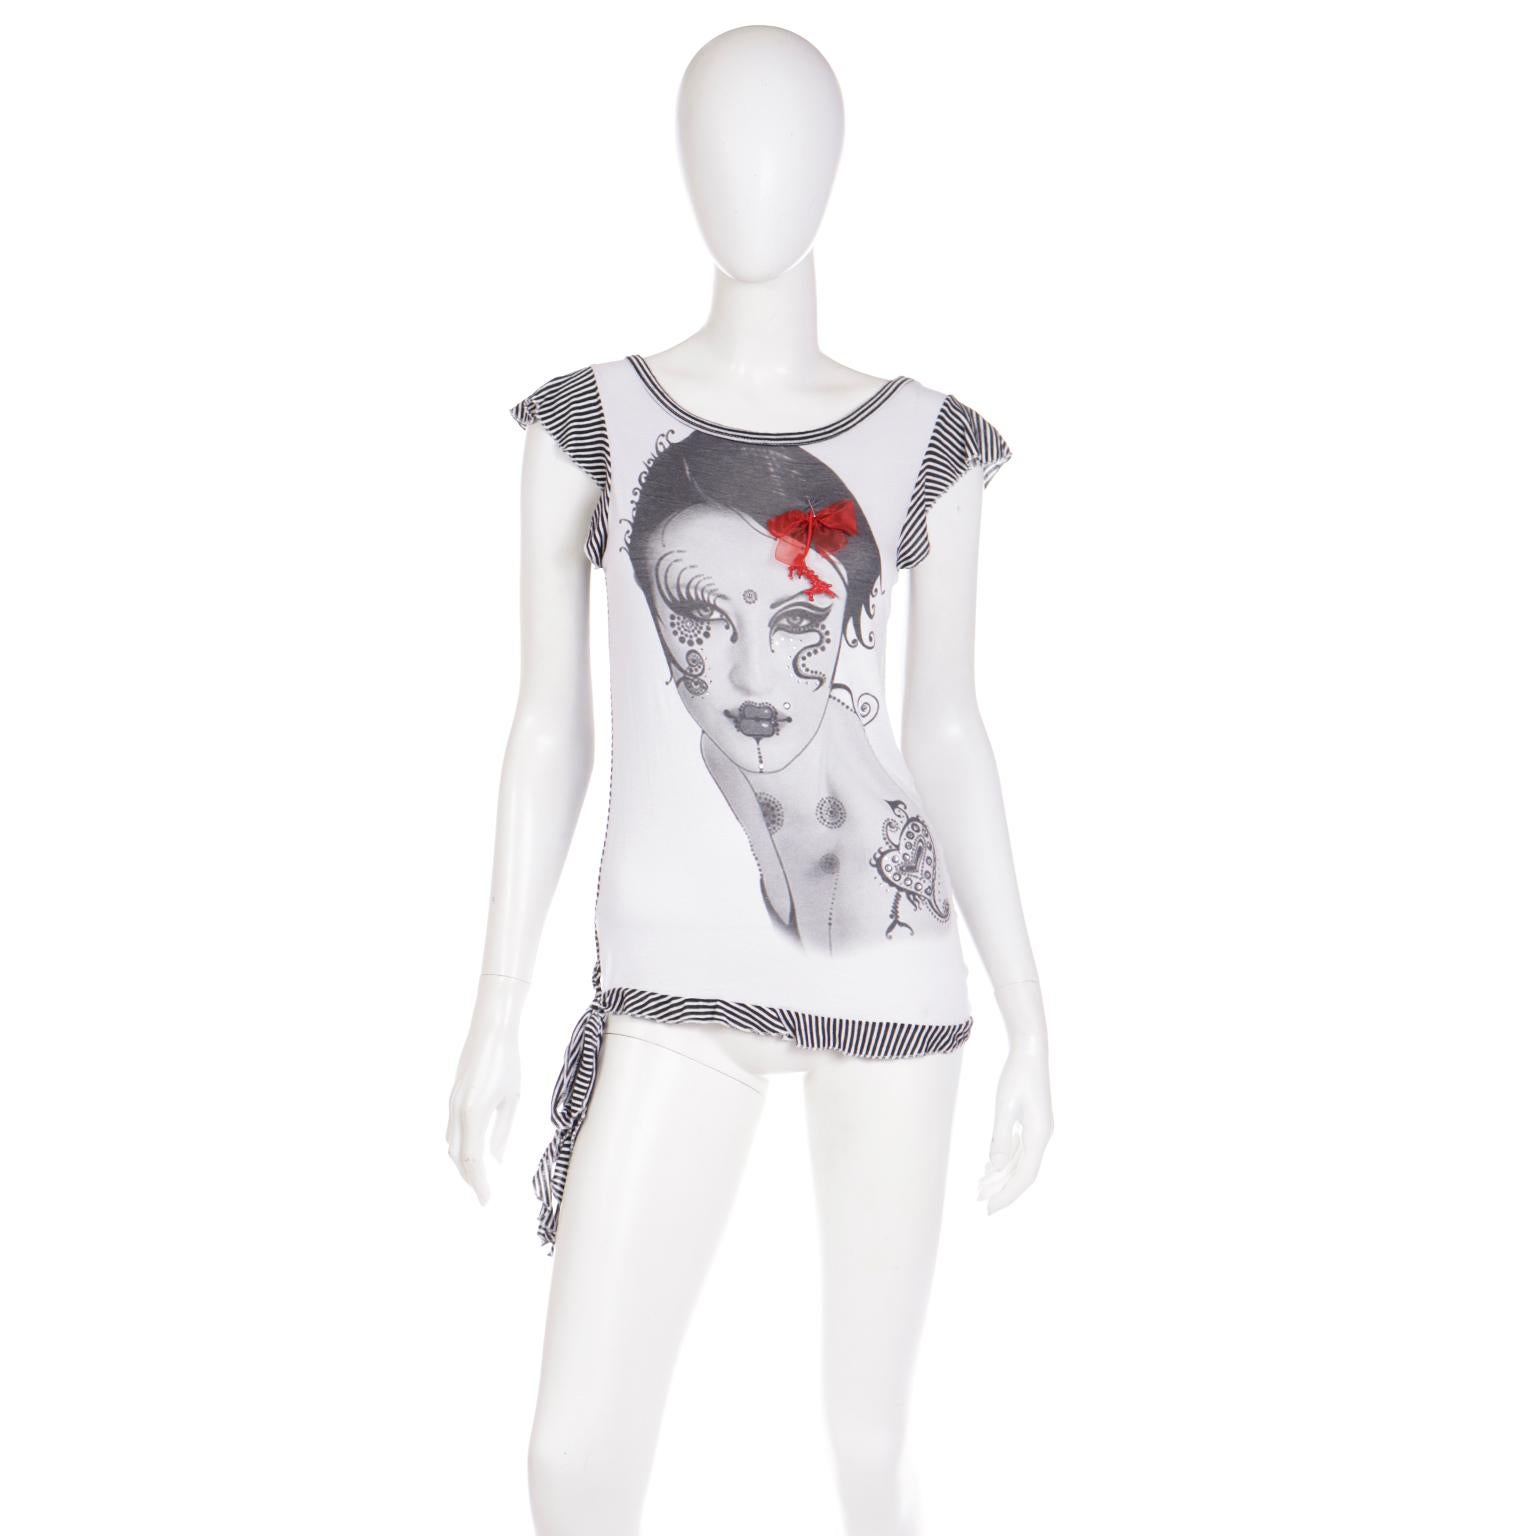 This is such an effortlessly fun vintage Gianfranco Ferre top featuring a woman in black and white on the front with a detachable red bow in her hair and pretty rhinestone embellishments on her face and her 